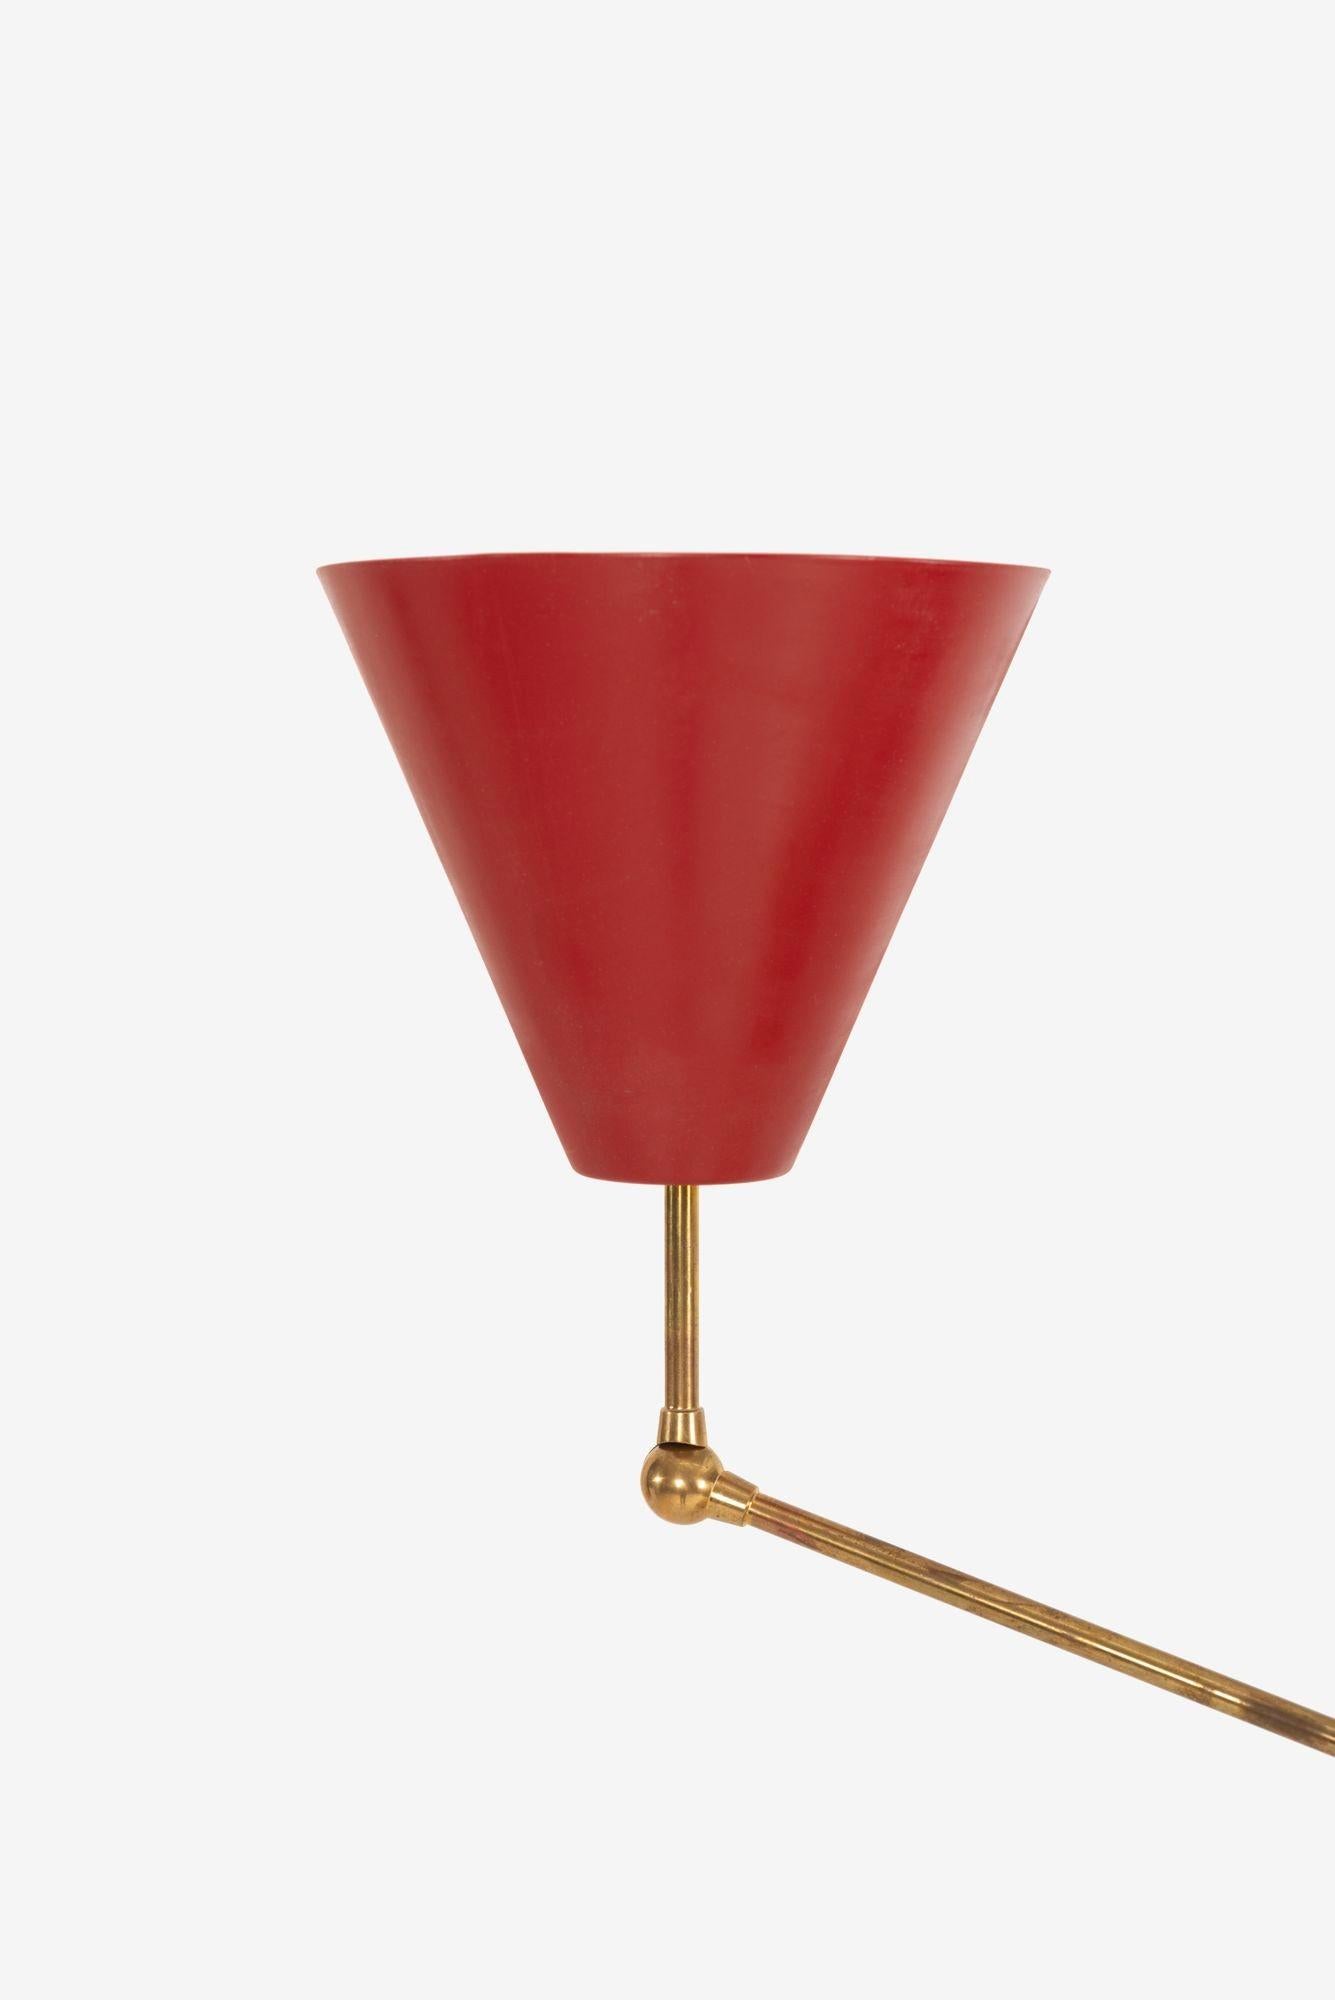 Angelo Lelii for Arredoluce Triennale Floor Lamp In Good Condition For Sale In Chicago, IL